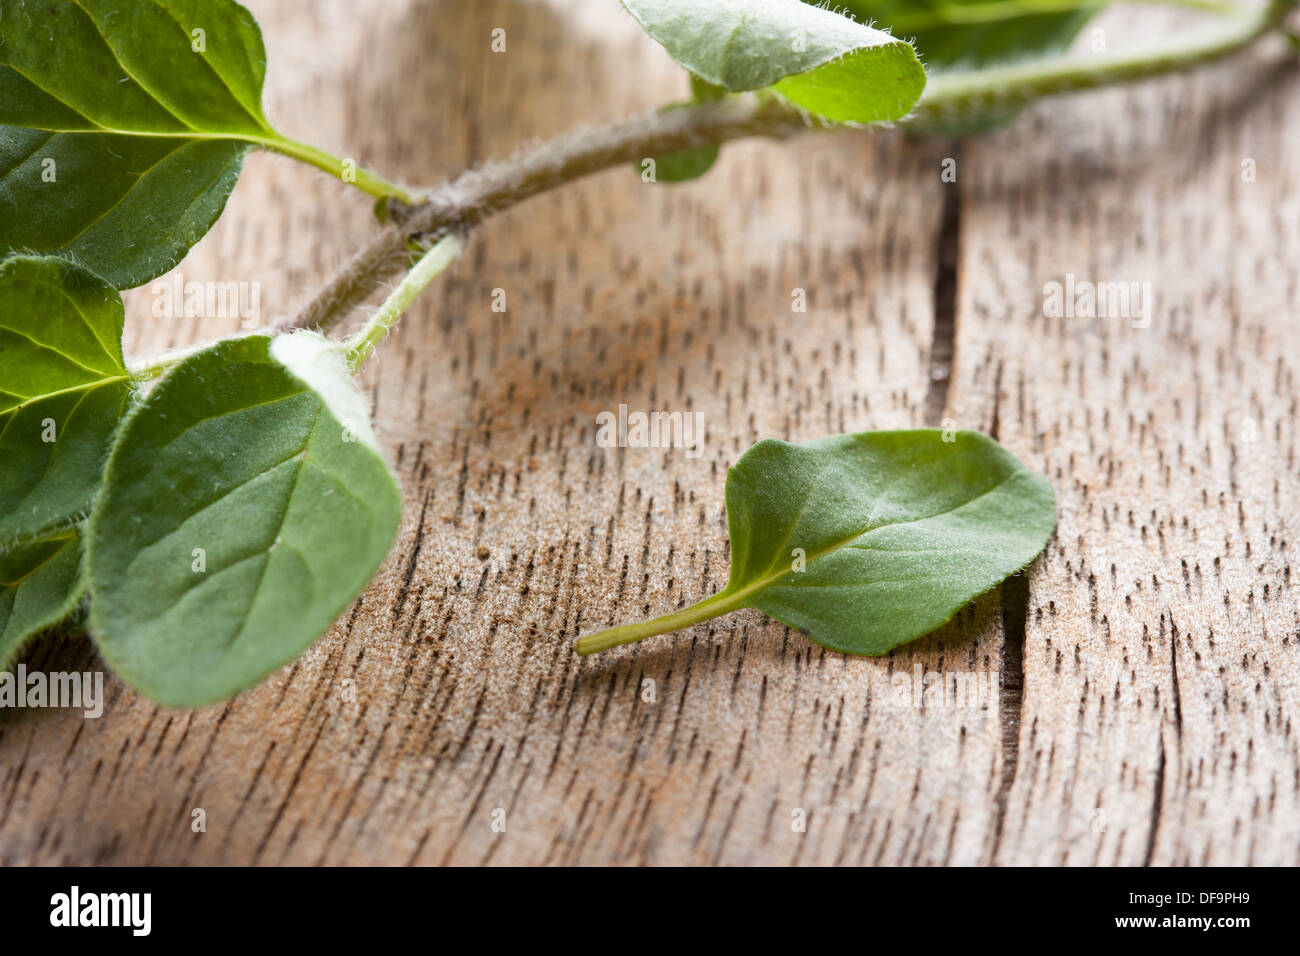 Fresh oregano sprig with a single leaf over wooden table close-up Stock Photo